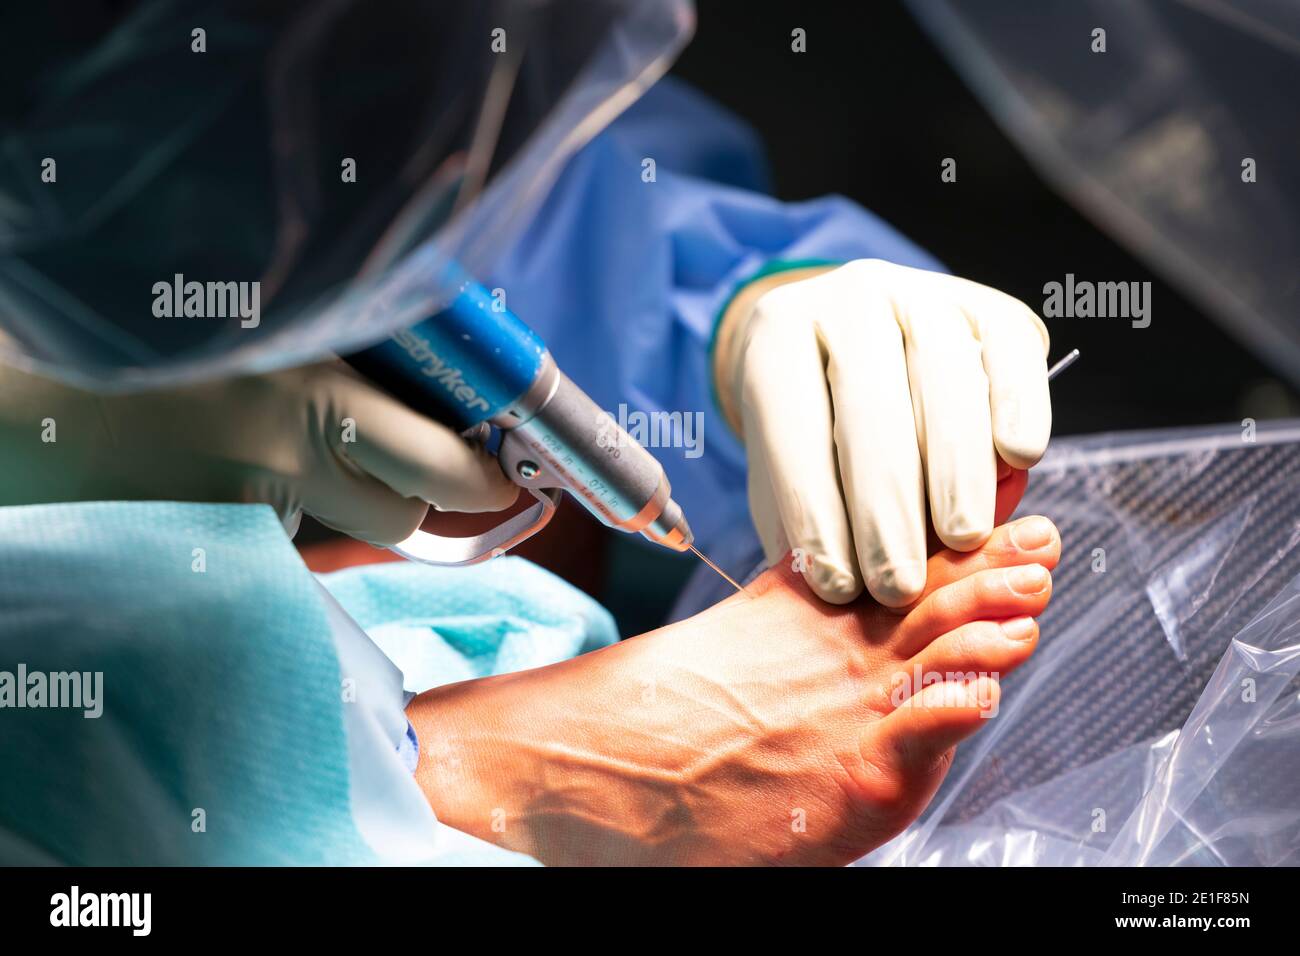 a surgeon operates on a foot with minimally invasive instruments Stock Photo